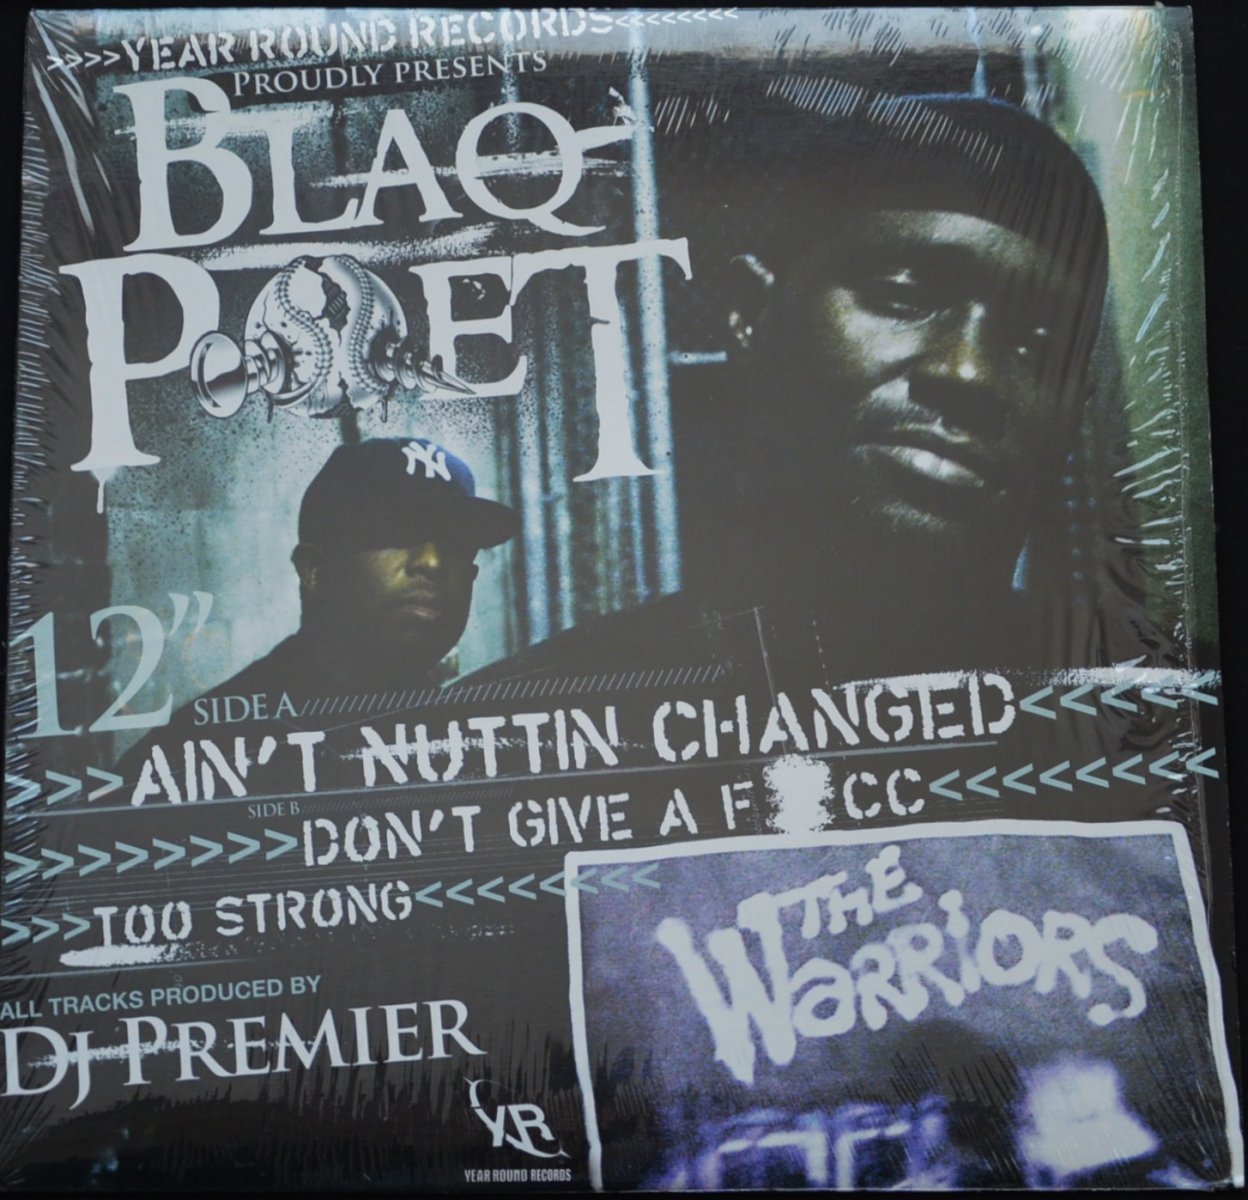 BLAQ POET / AIN'T NUTTIN CHANGED / DON'T GIVE A F*CC / TOO STRONG (12